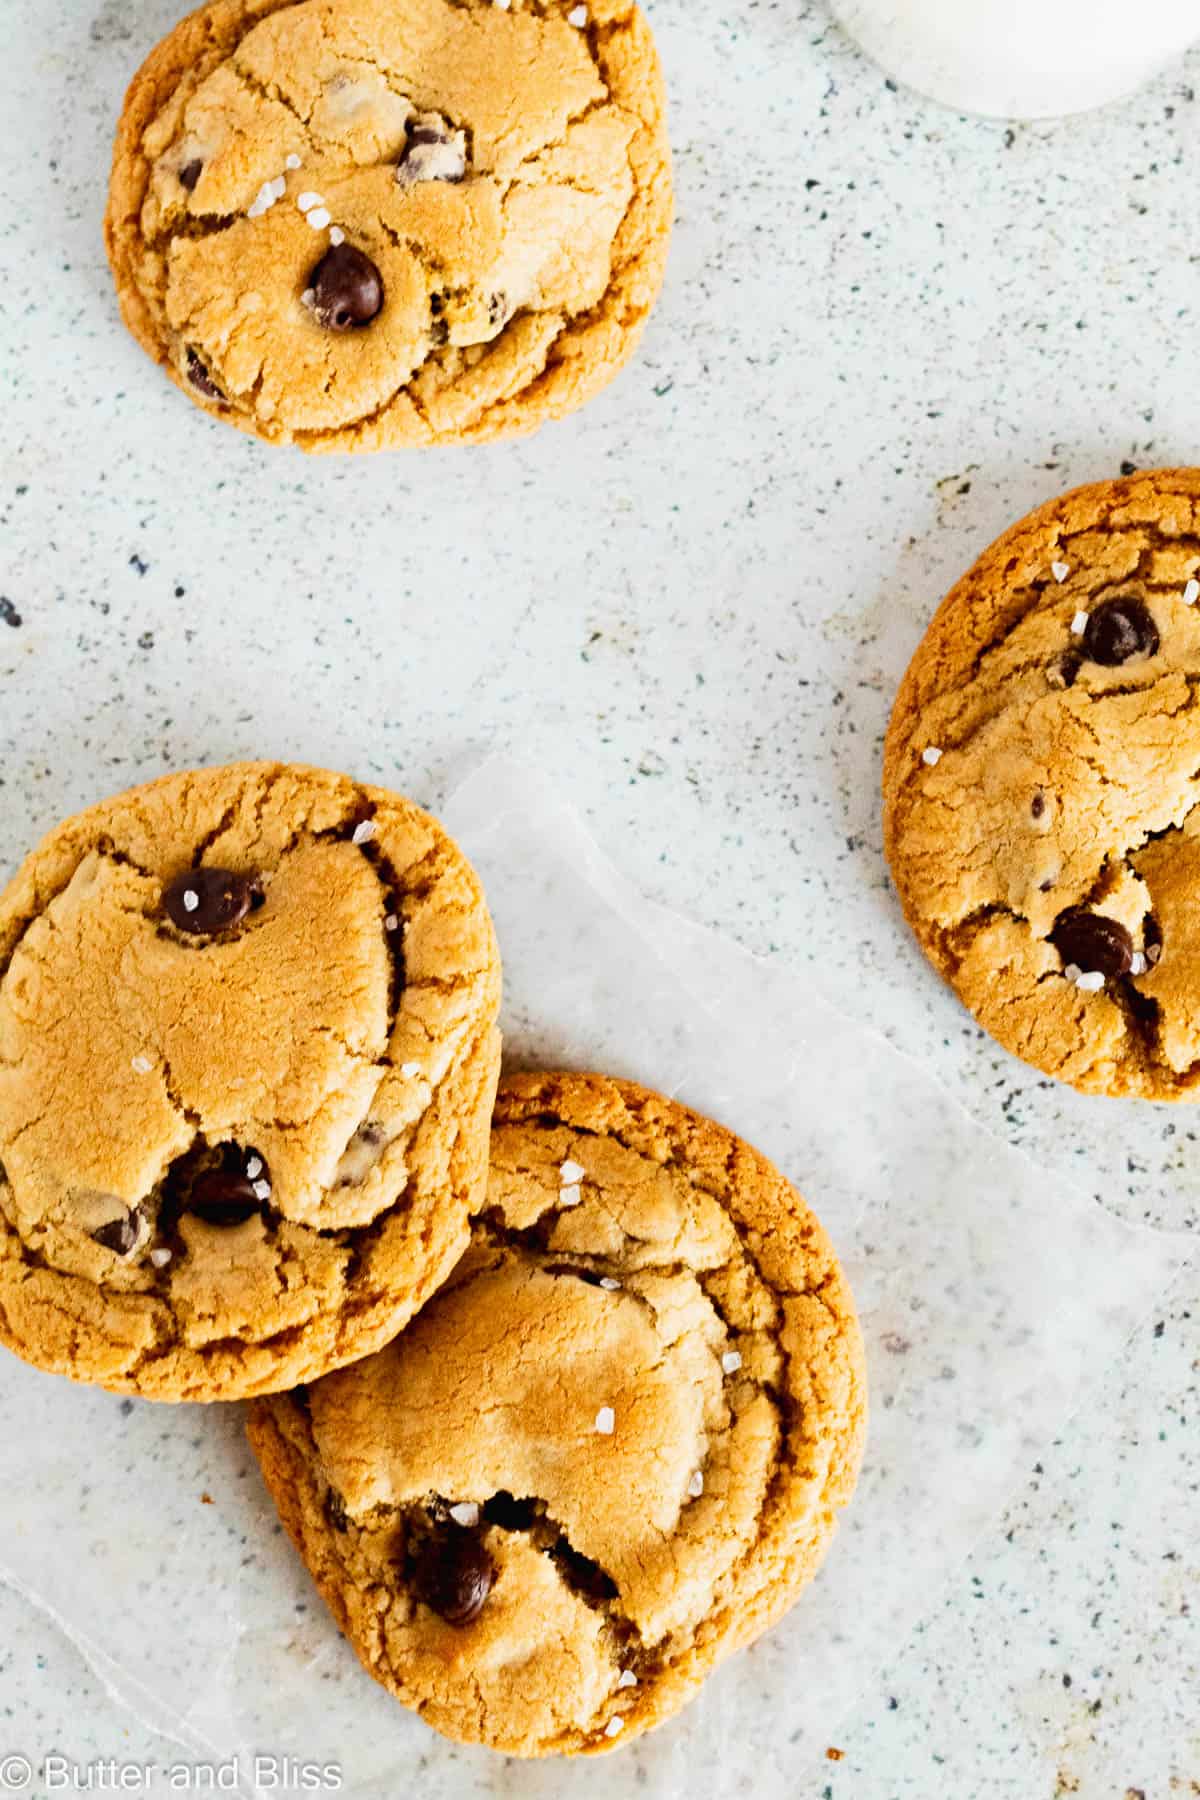 Caramel chocolate chip cookies on a table with a glass of milk.